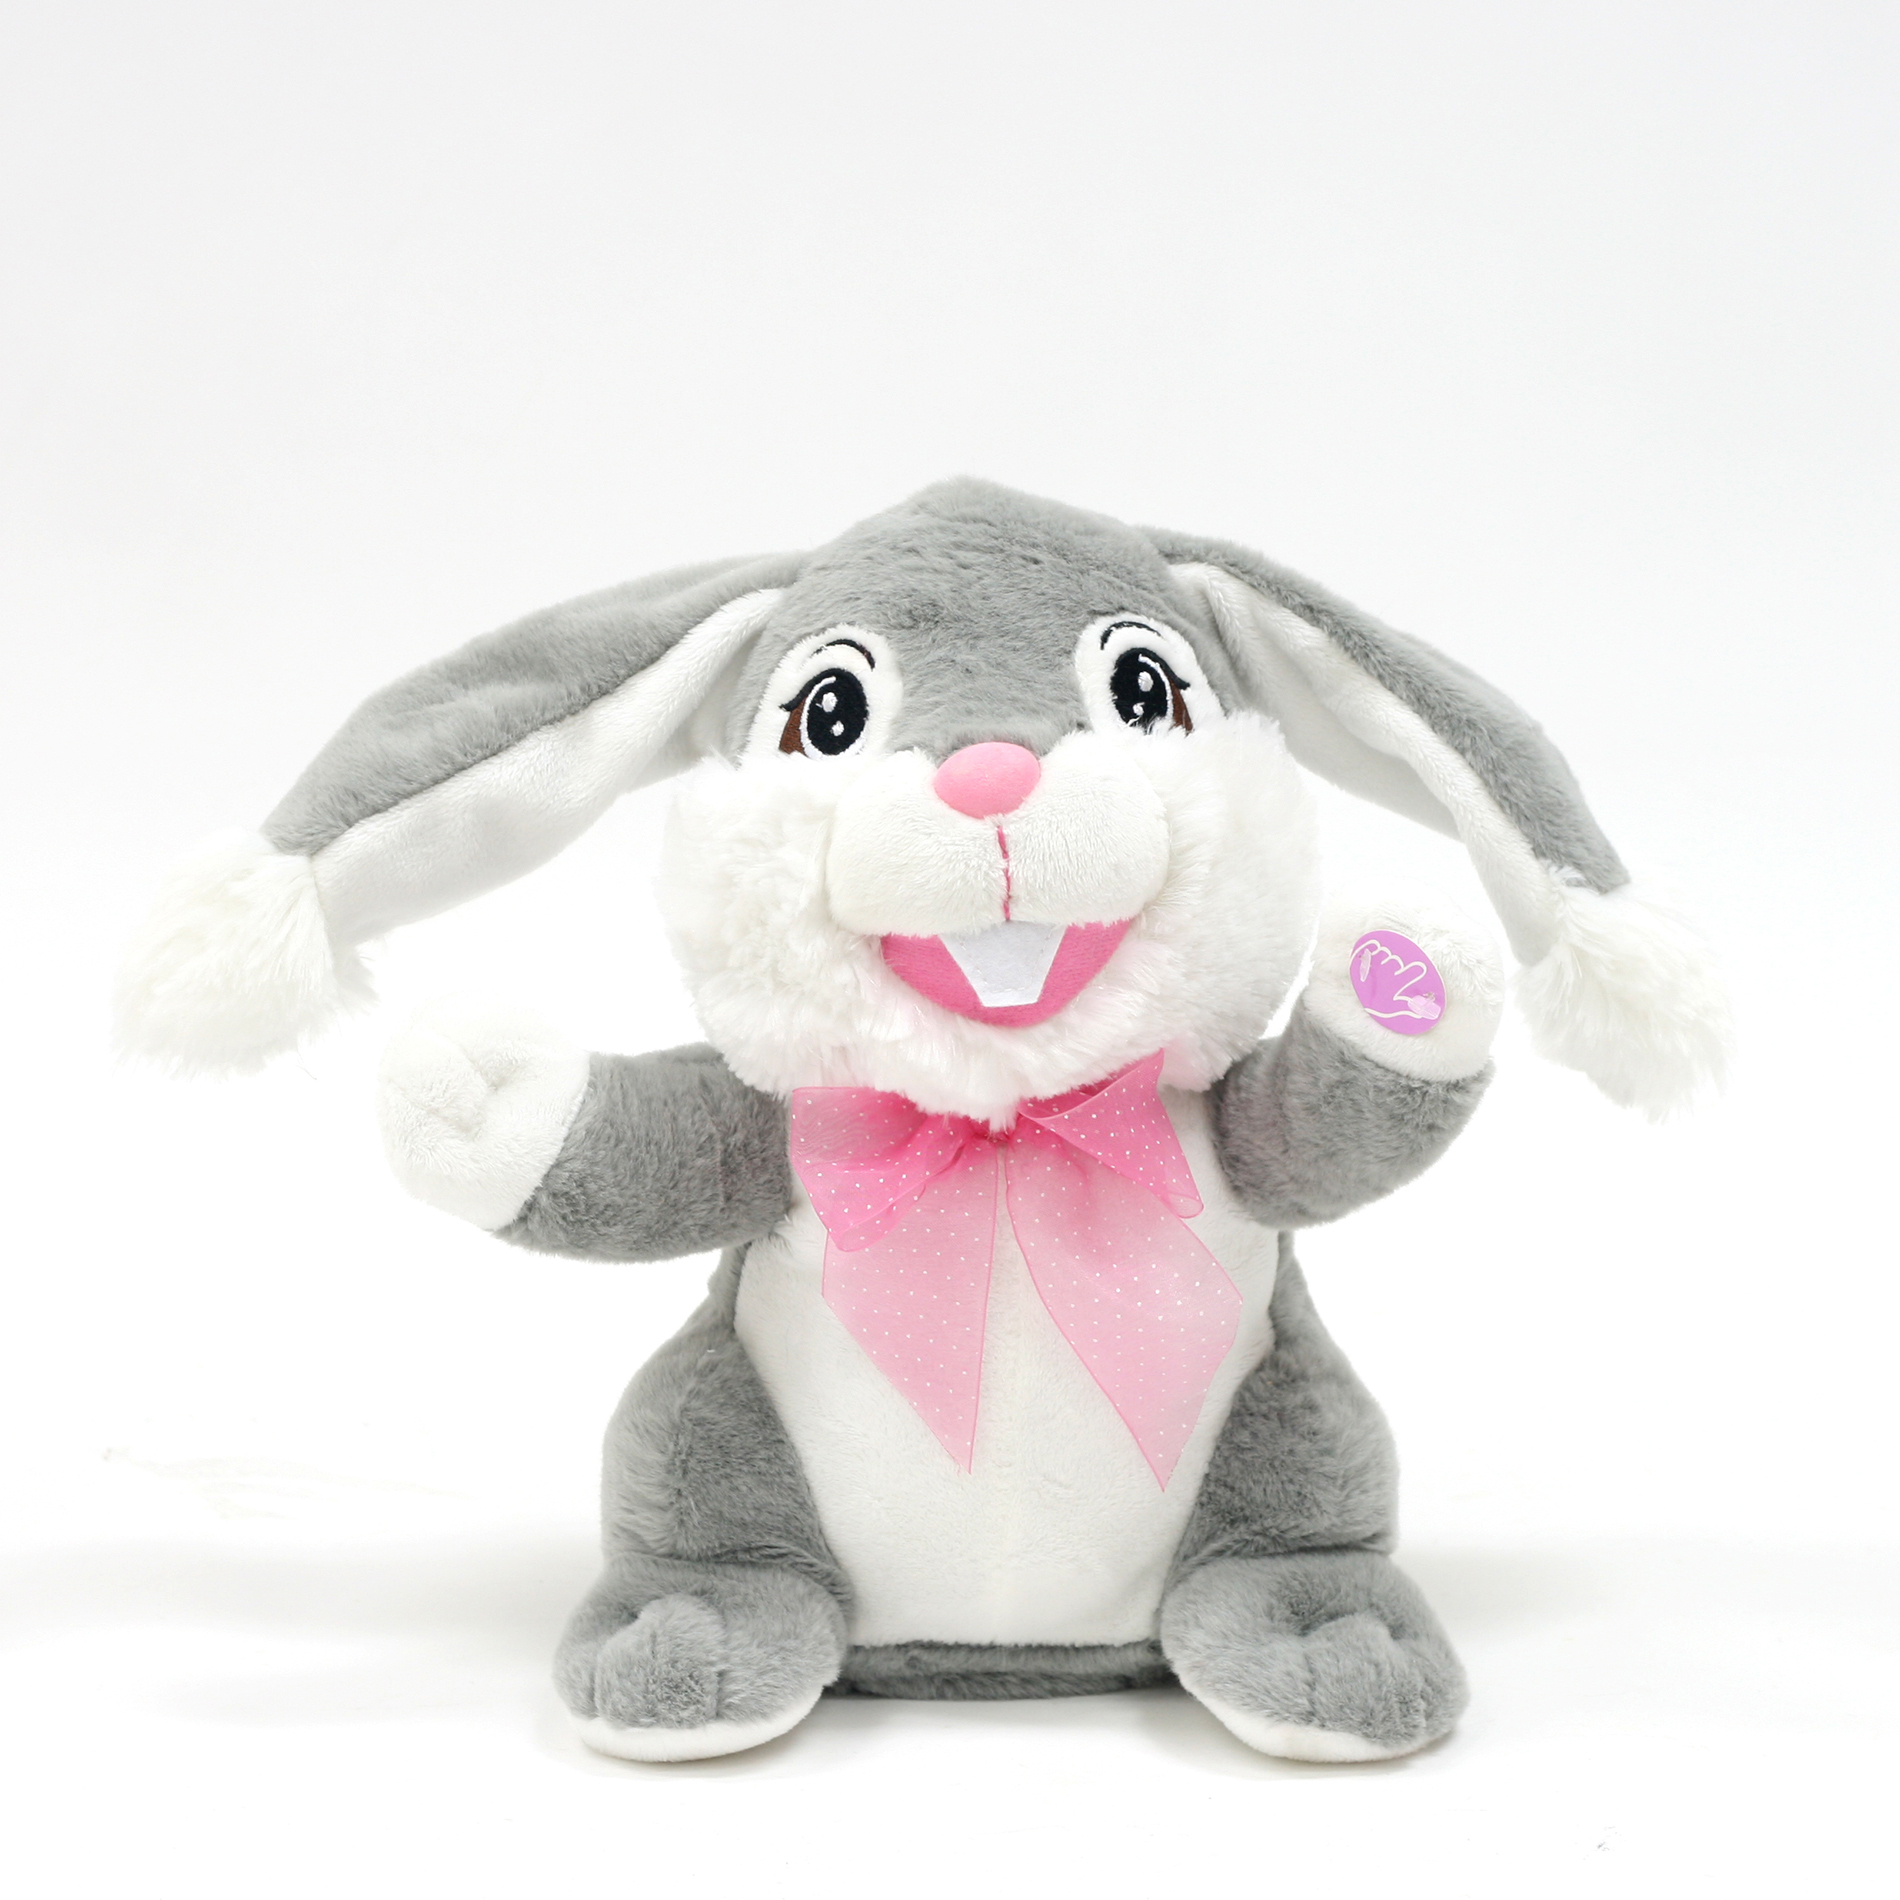 Easter Jubilee 8" Dancing Ear Flop Bunny - Fun and Playful